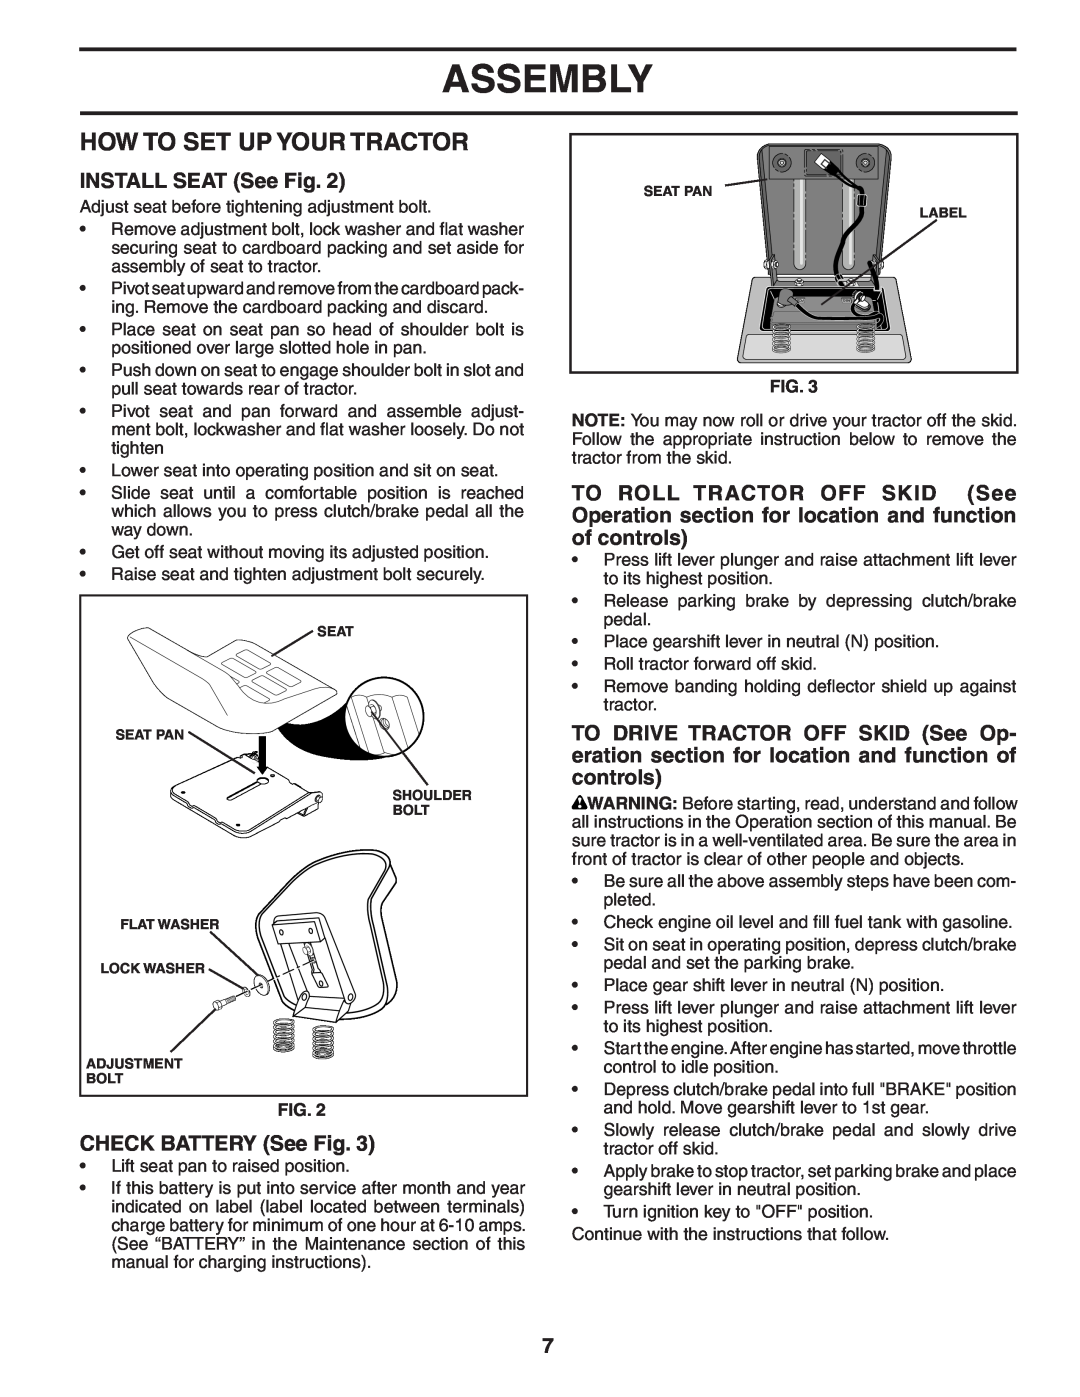 Weed Eater 186778, WE1538C manual How To Set Up Your Tractor, INSTALL SEAT See Fig, CHECK BATTERY See Fig, Assembly 